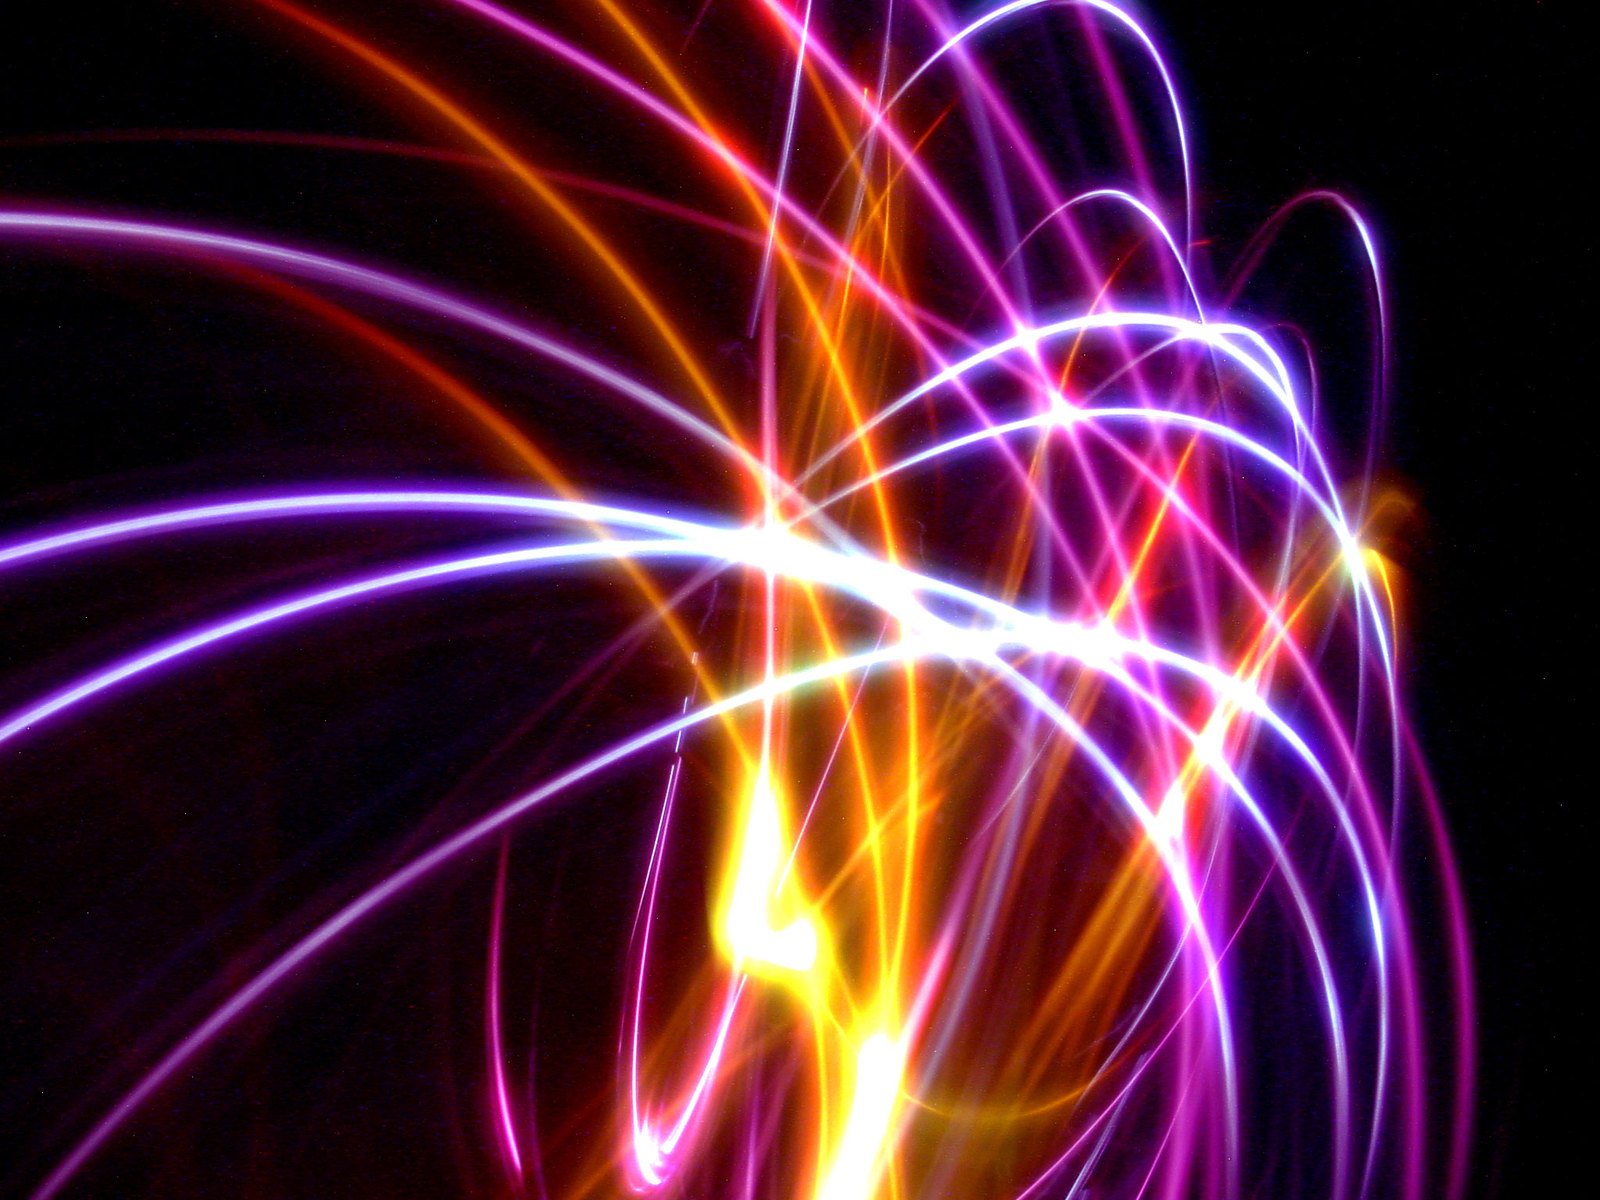 fireworks are blurry and moving in the air